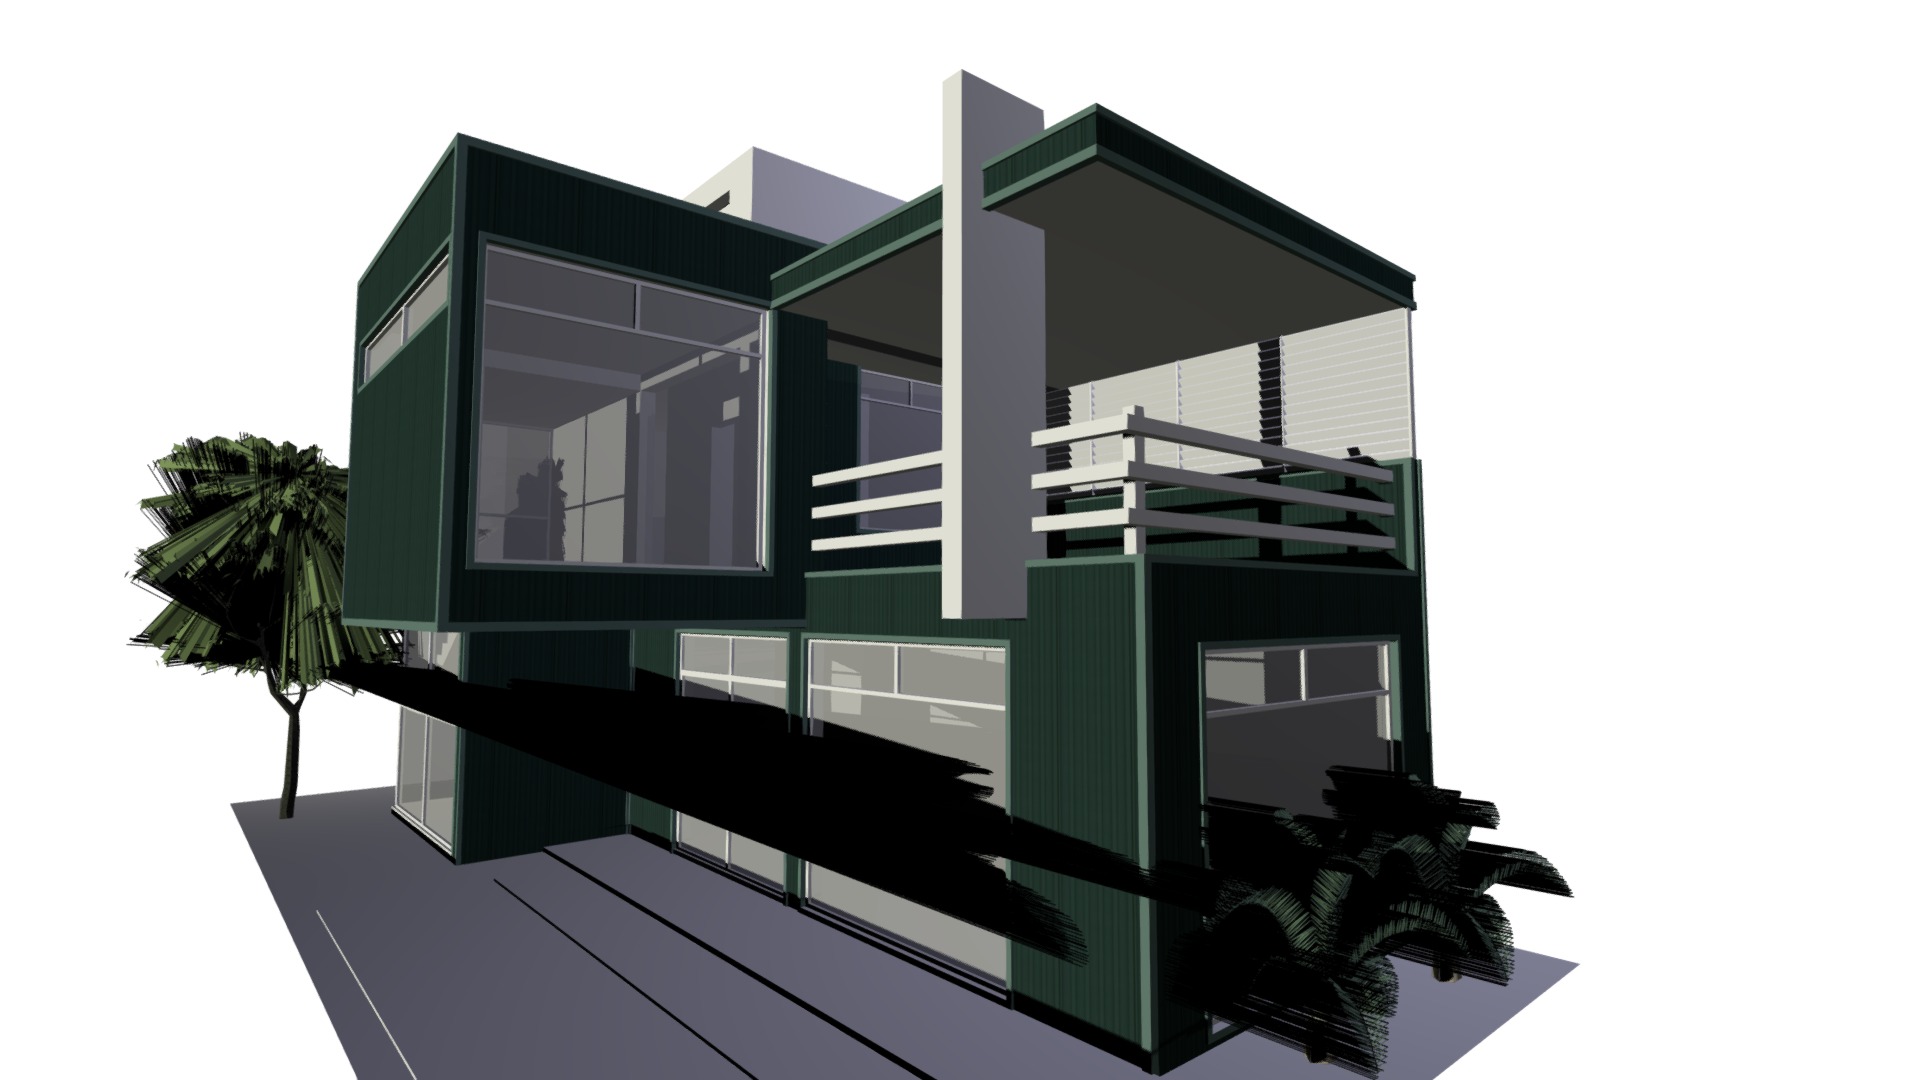 Design prototype for a house made out of containers - Container House - 3D model by arq_gcgt 3d model